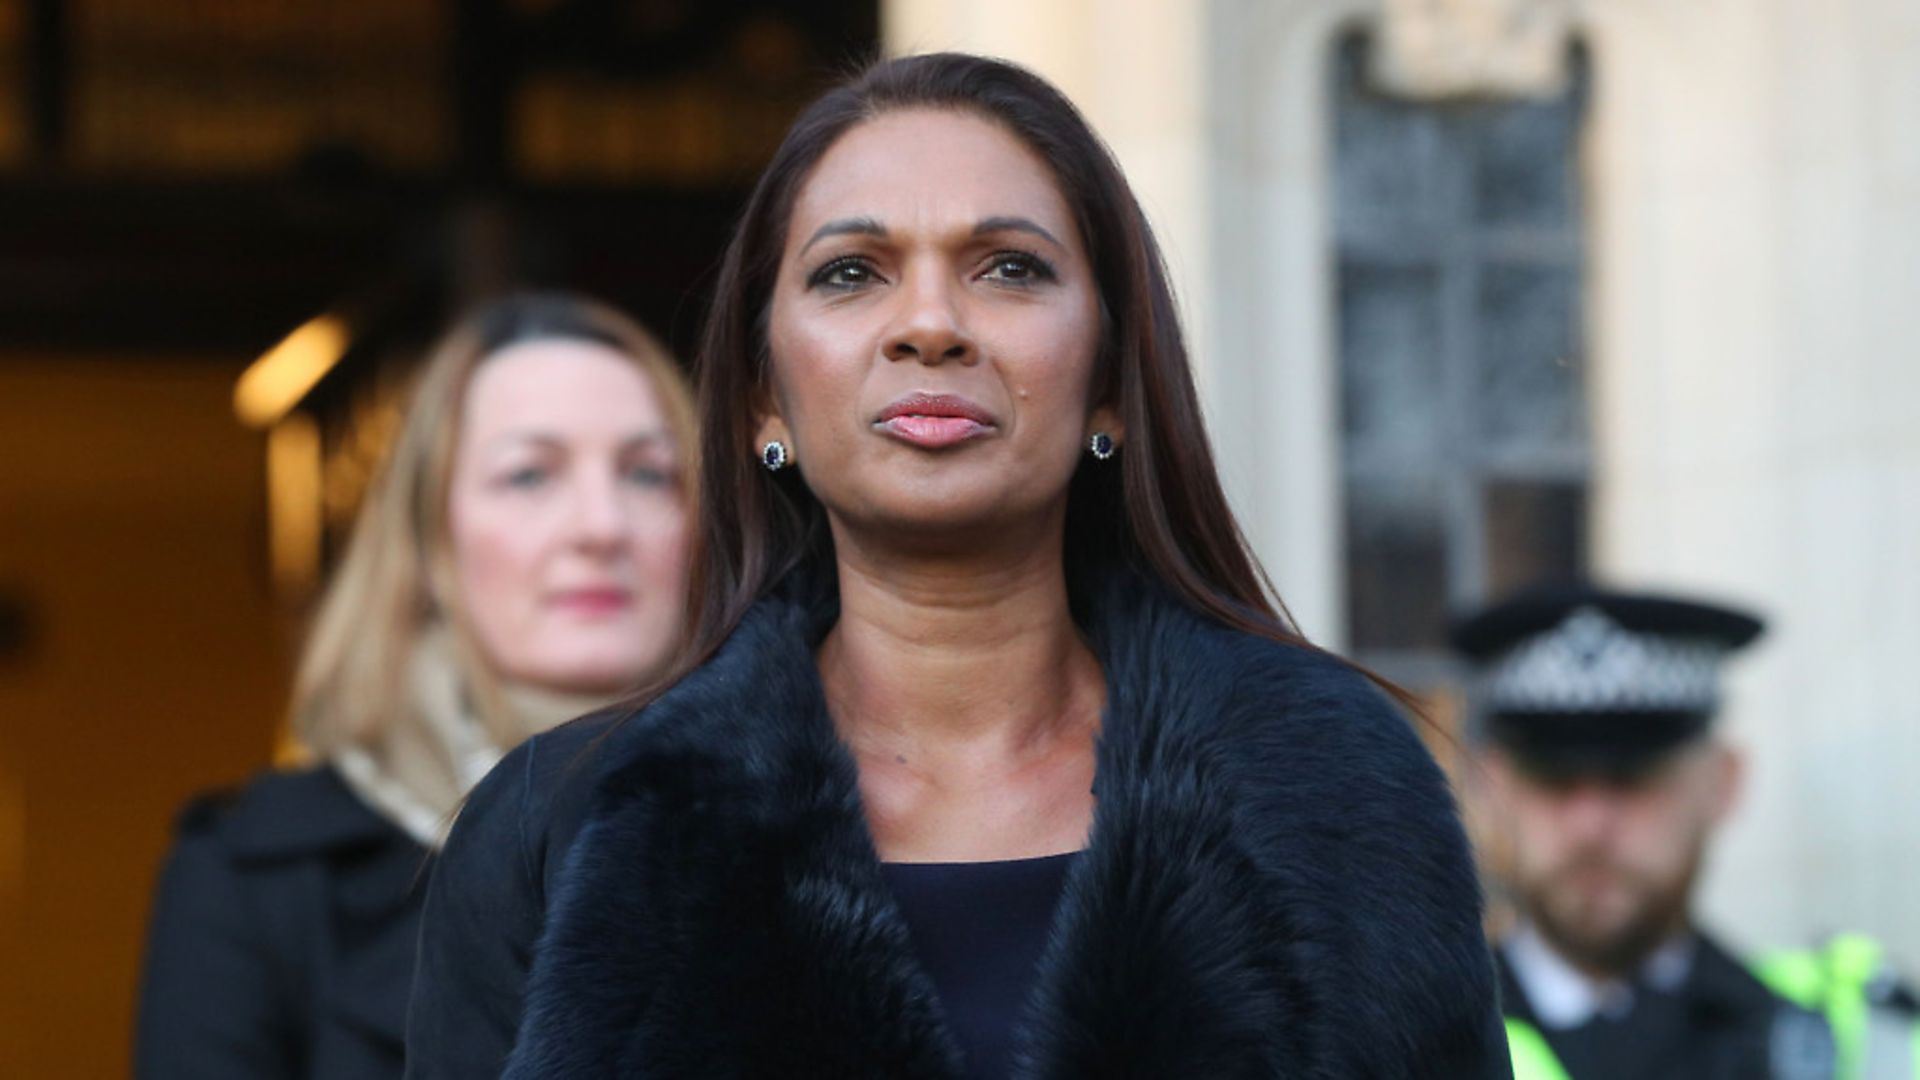 Gina Miller.  (Photo by Jonathan Brady - WPA Pool /Getty Images) - Credit: Getty Images